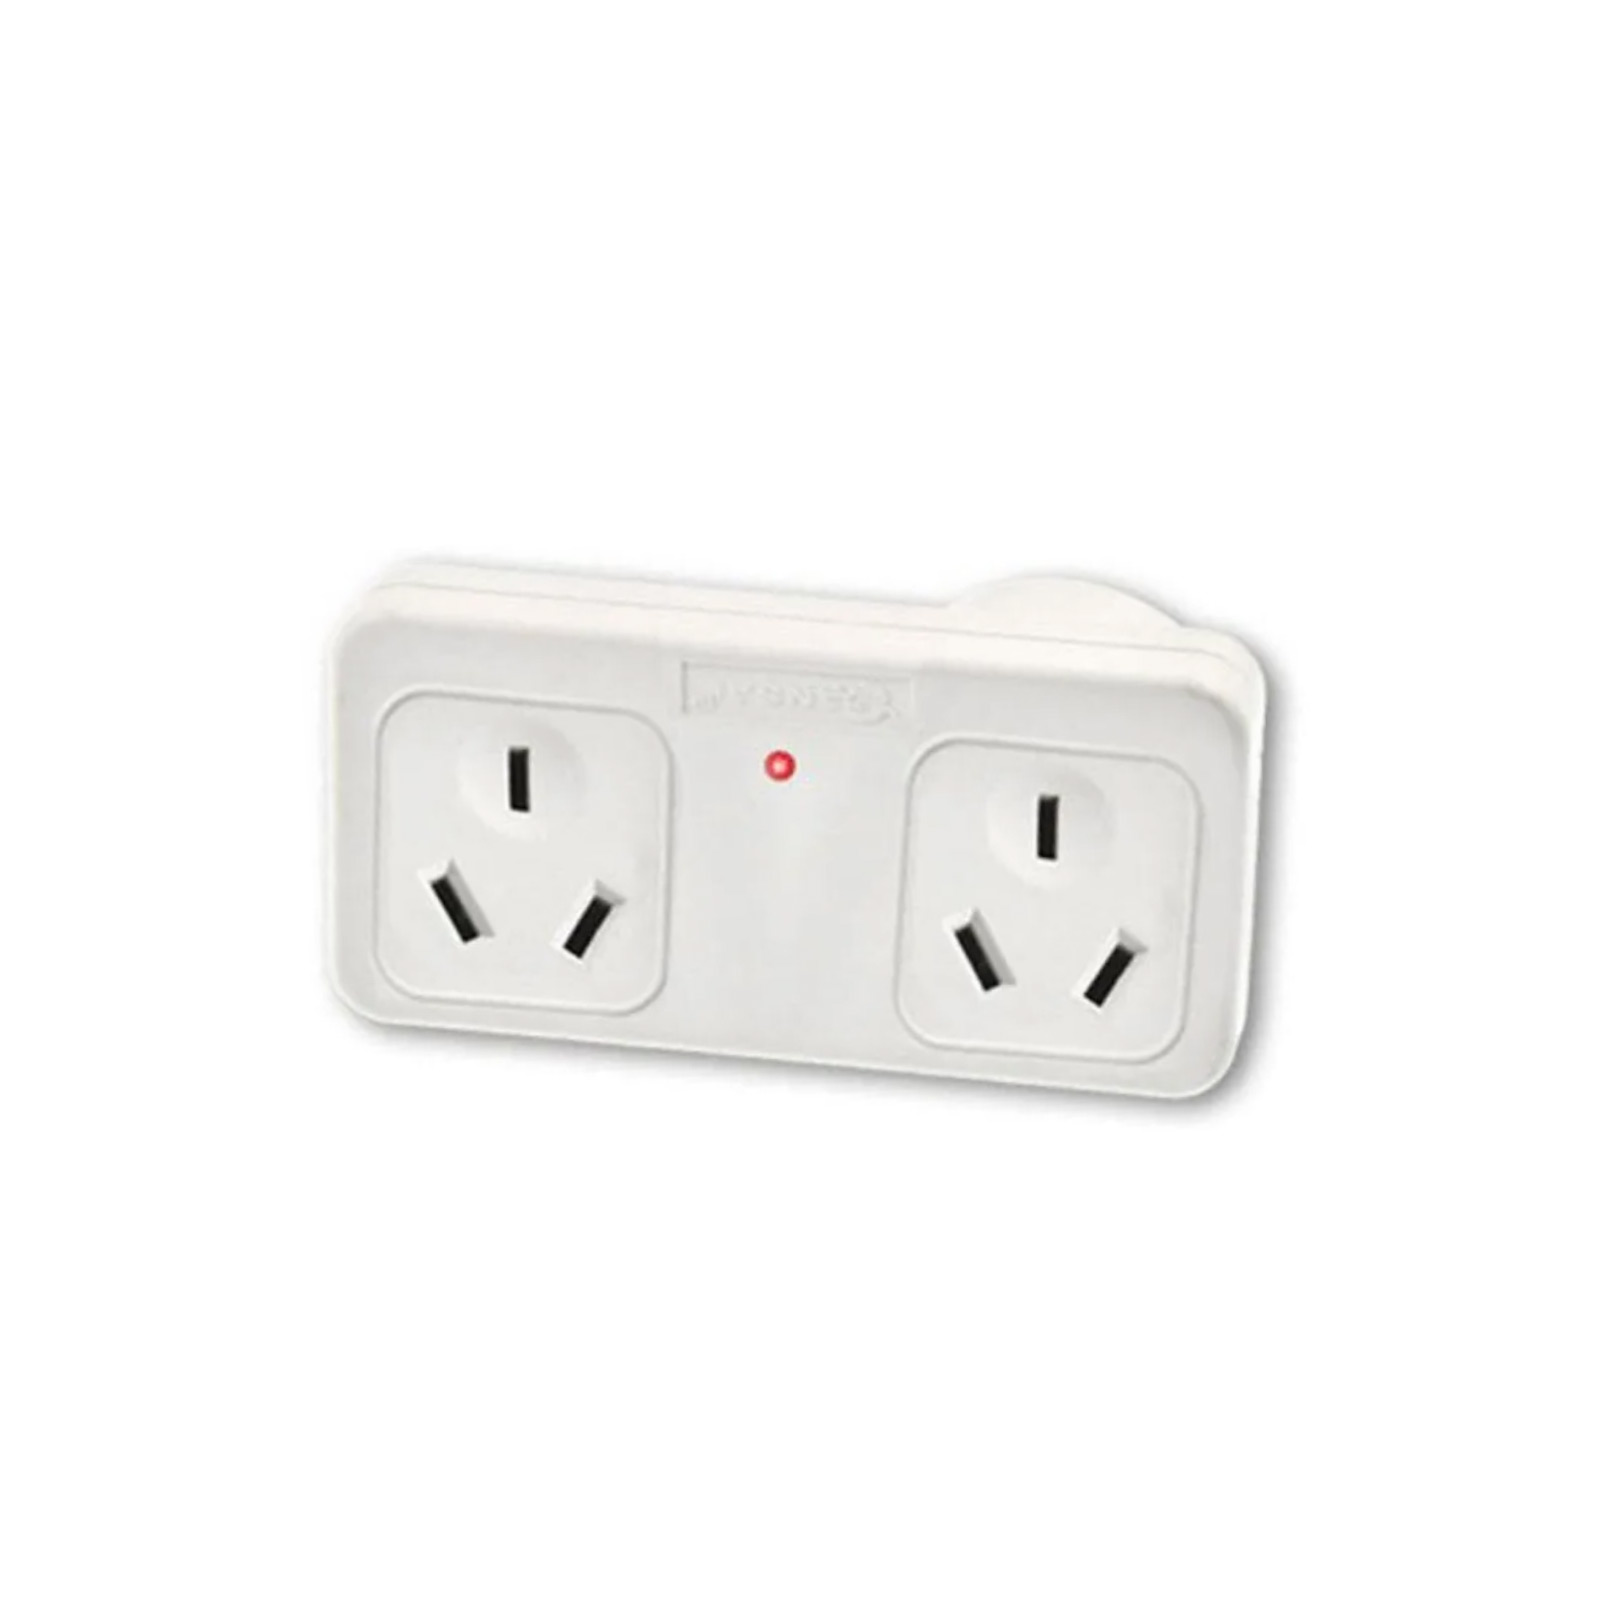 4X Sansai Surge Protected Adaptor - Double Right Hand